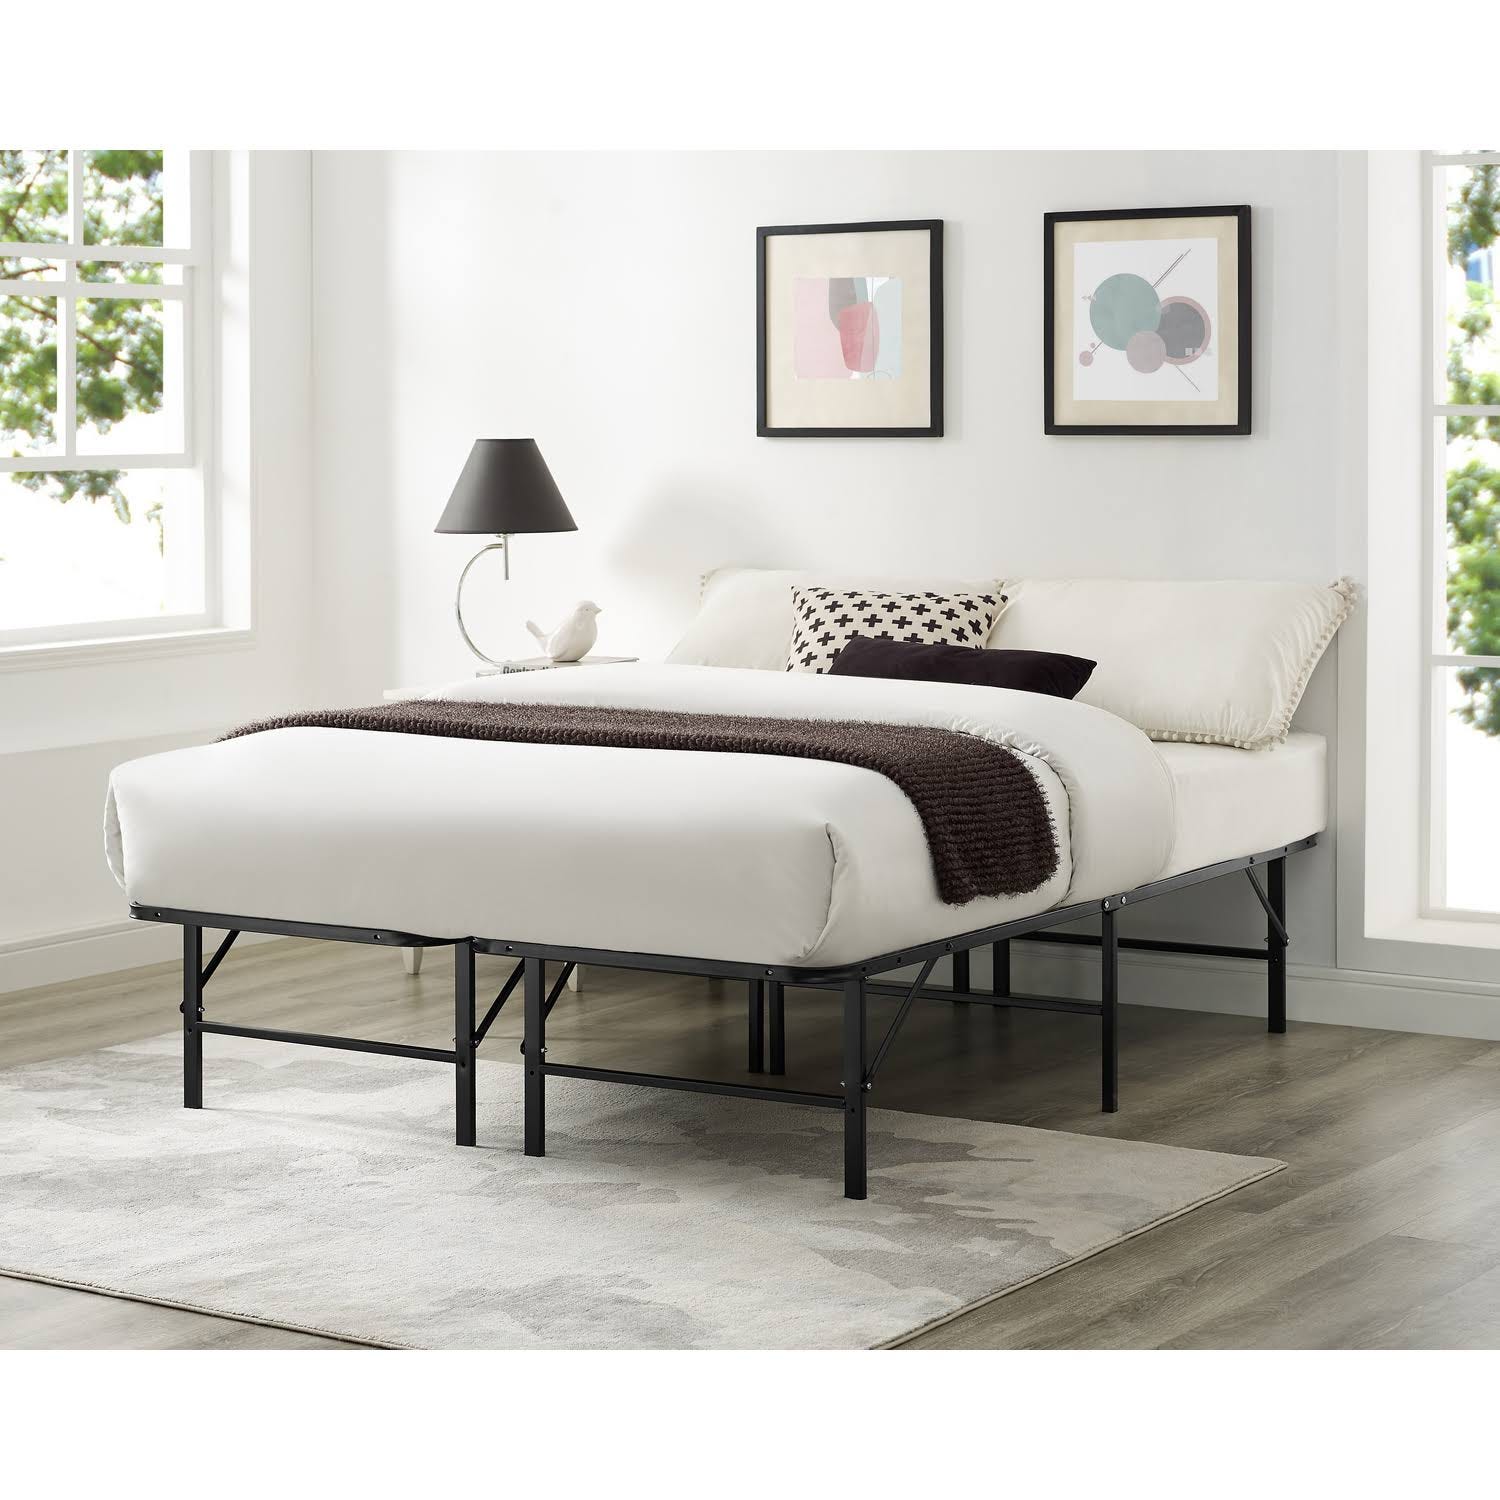 Affordable Heavy-Duty Foldable Queen Bed Frame with Under-Bed Storage | Image